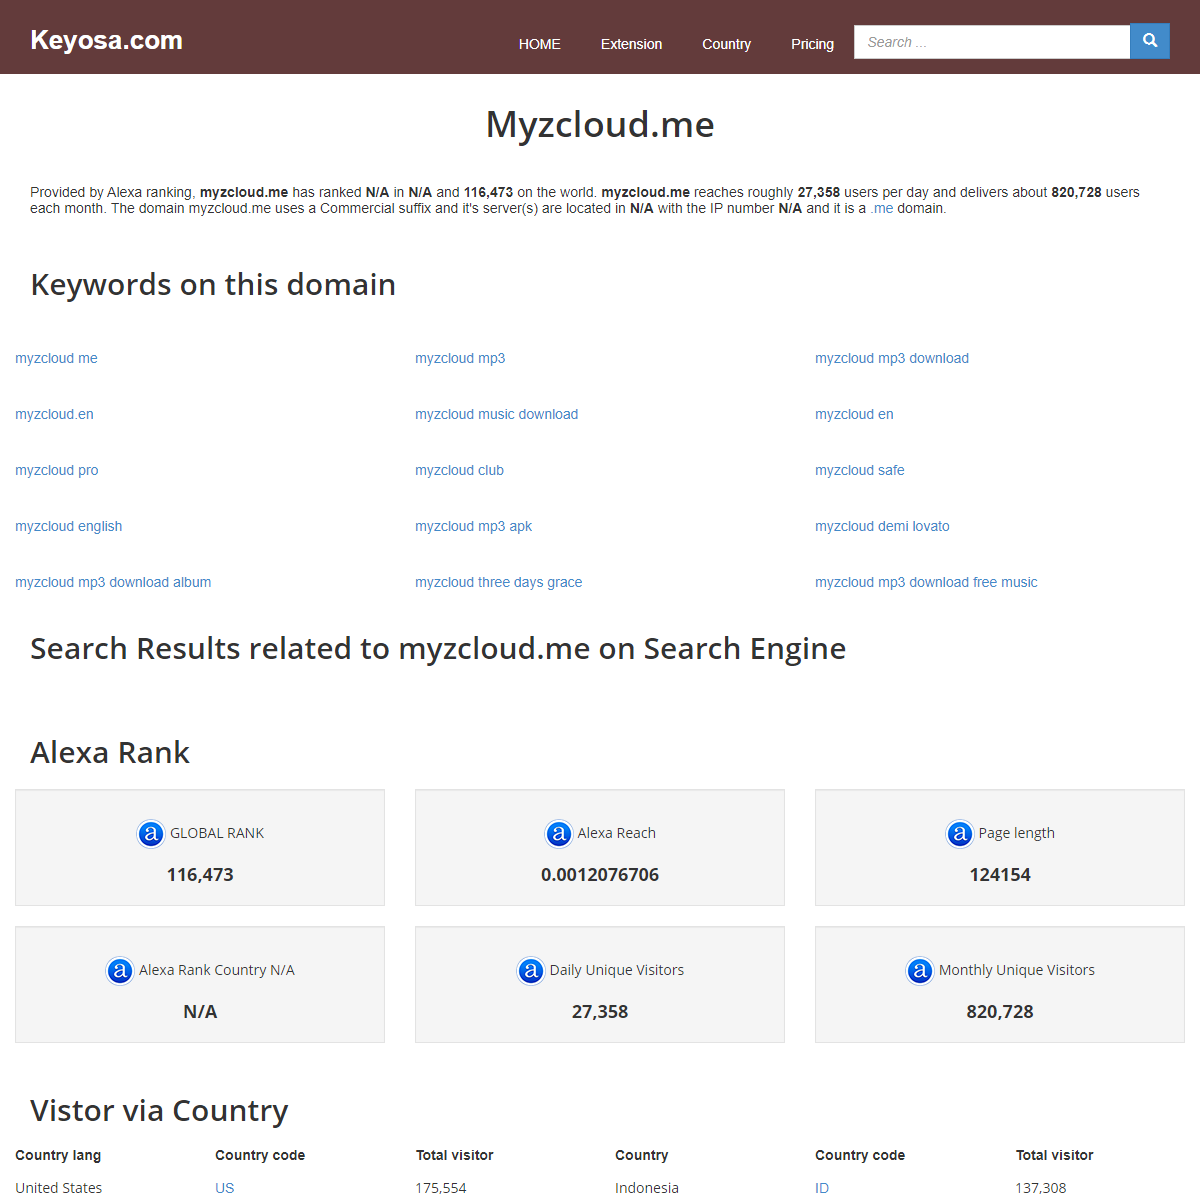 A complete backup of https://www.keyosa.com/site/myzcloud.me